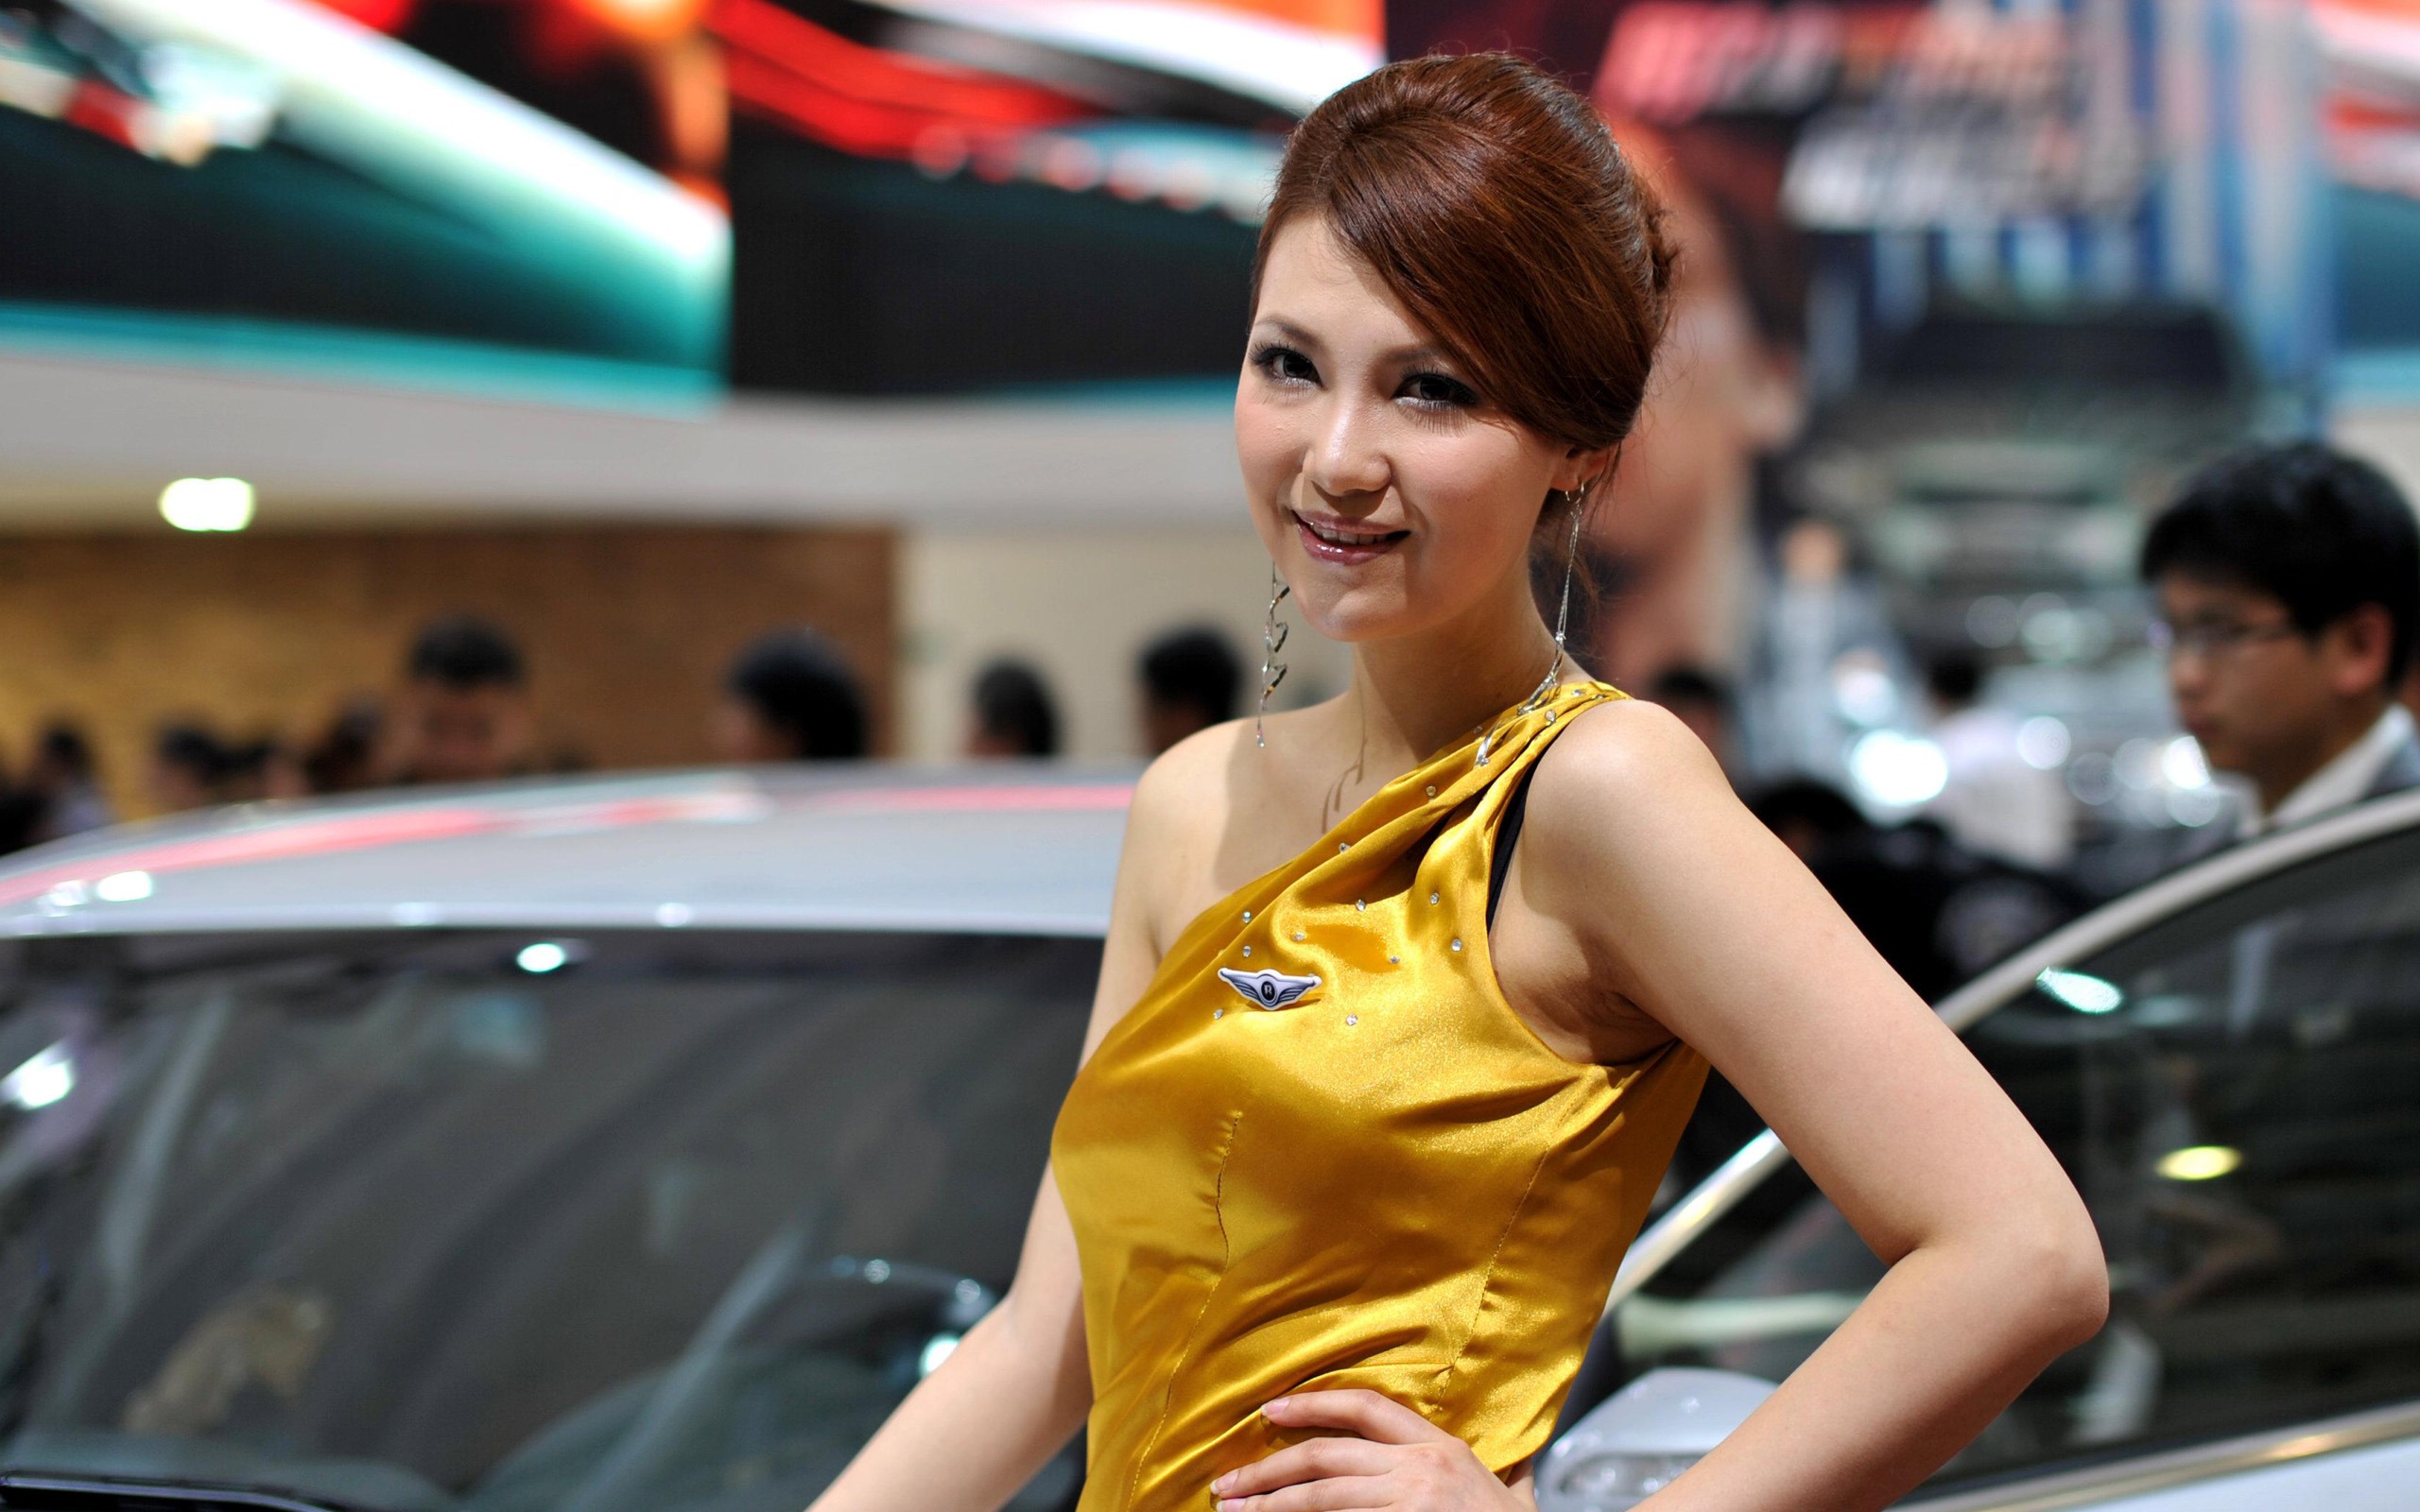 2010 Beijing Auto Show beauty (Kuei-east of the first works) #1 - 2560x1600